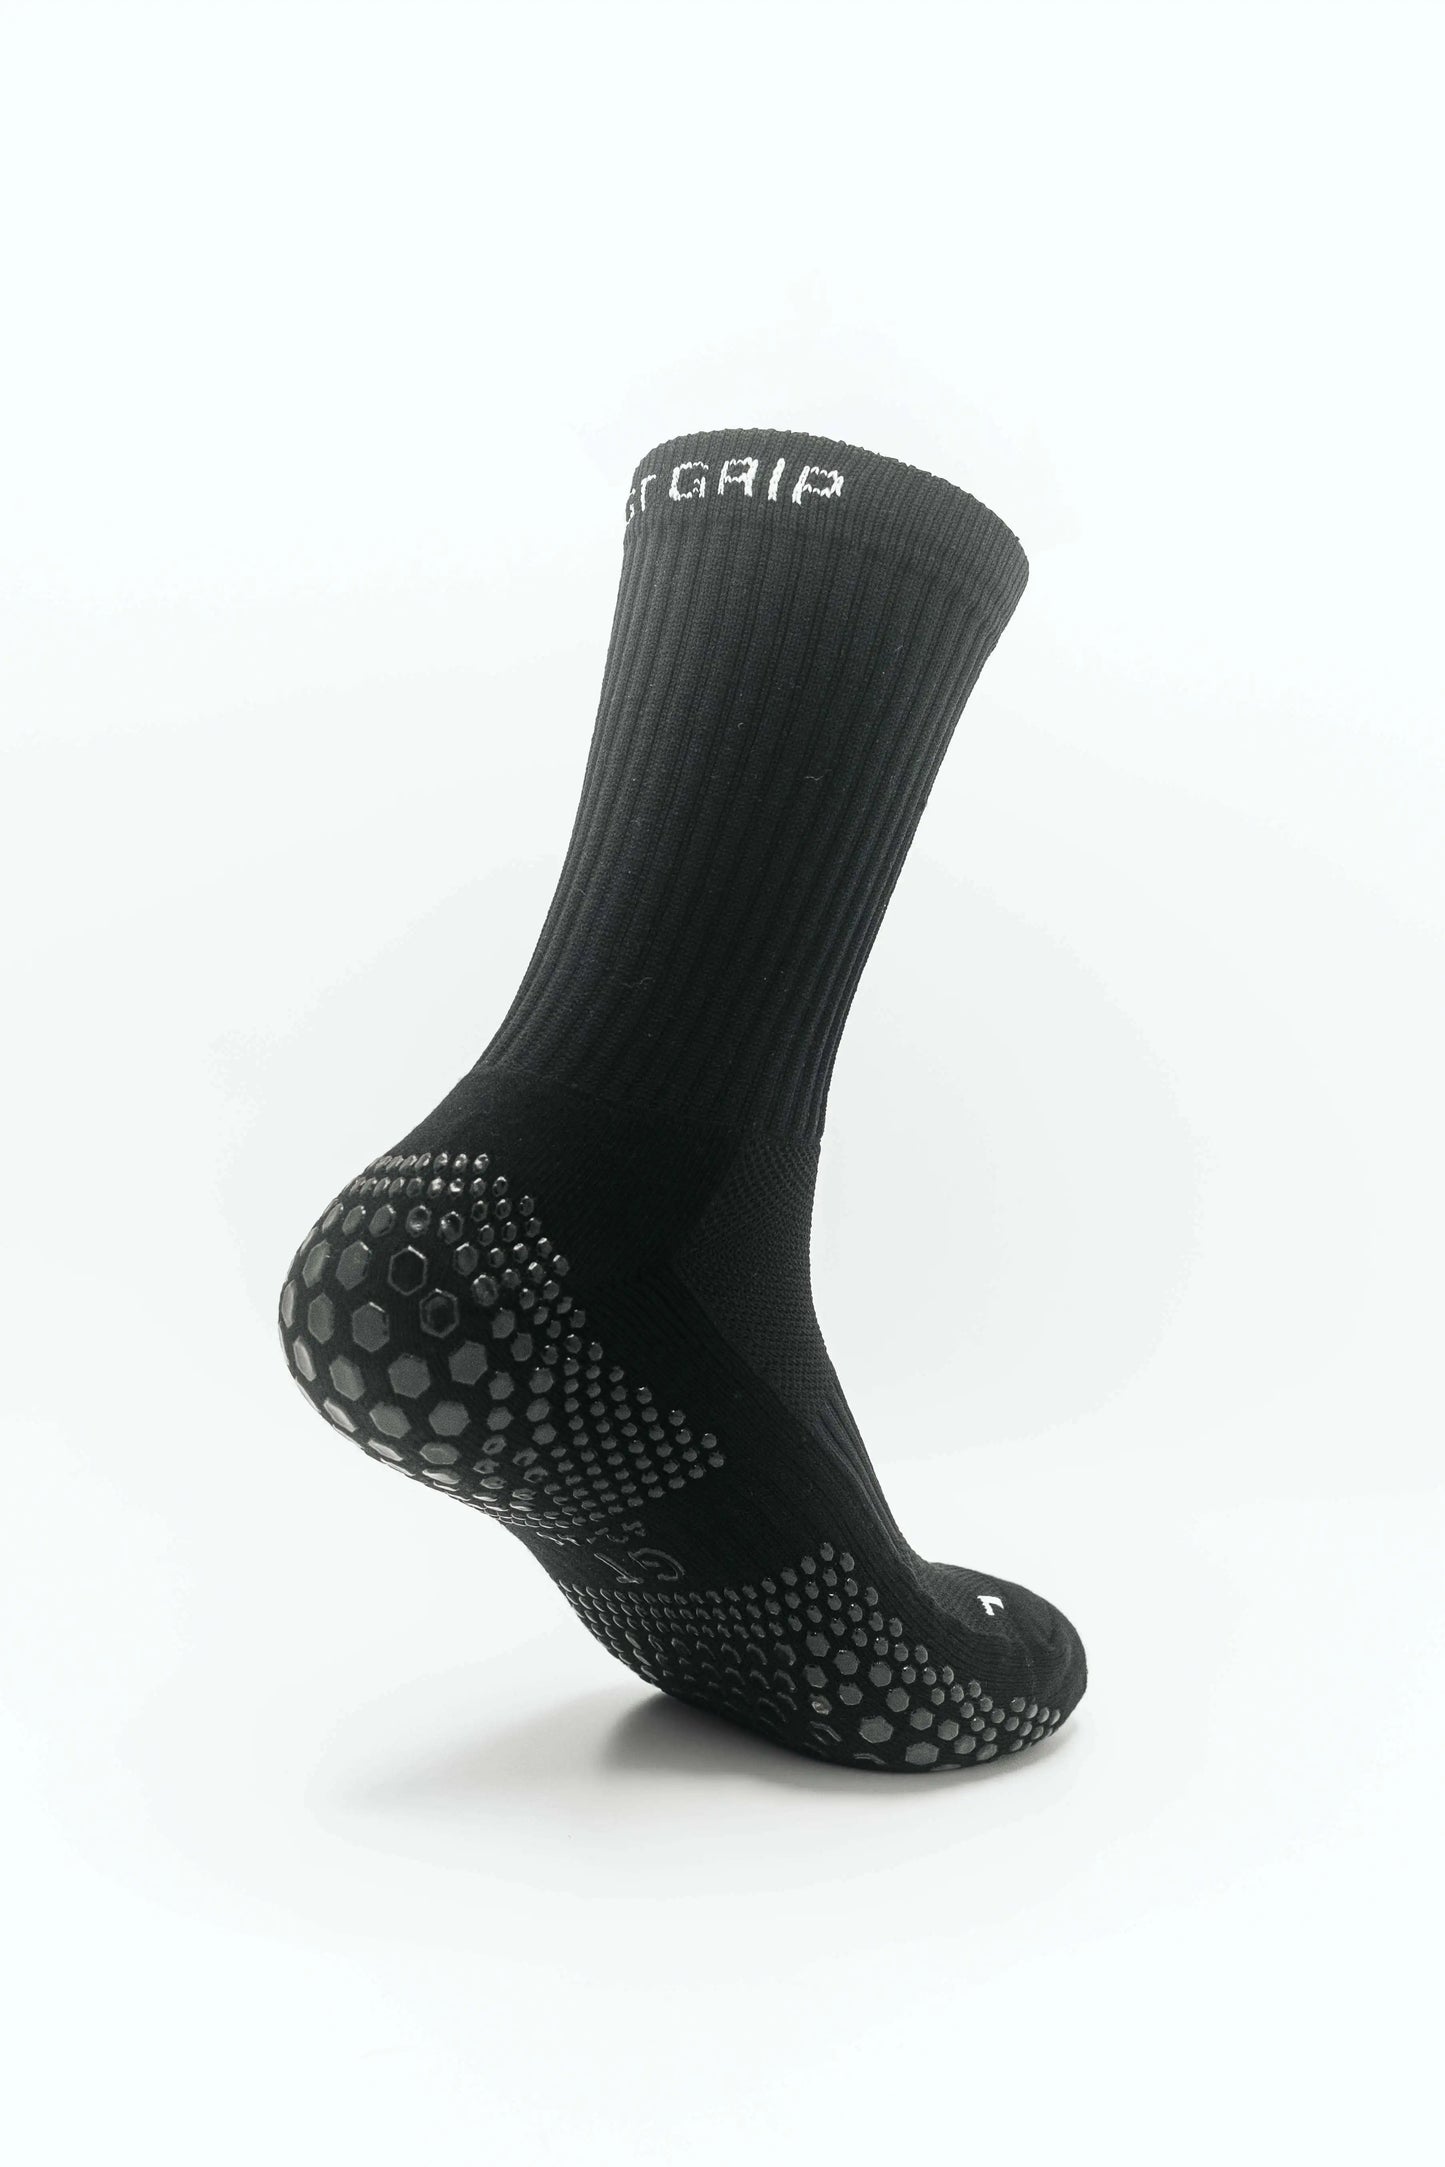 Black GT GRIP Socks Crew - Right Back View, Enhanced Stability and No-Slip Design for Confident Performance in Shoes